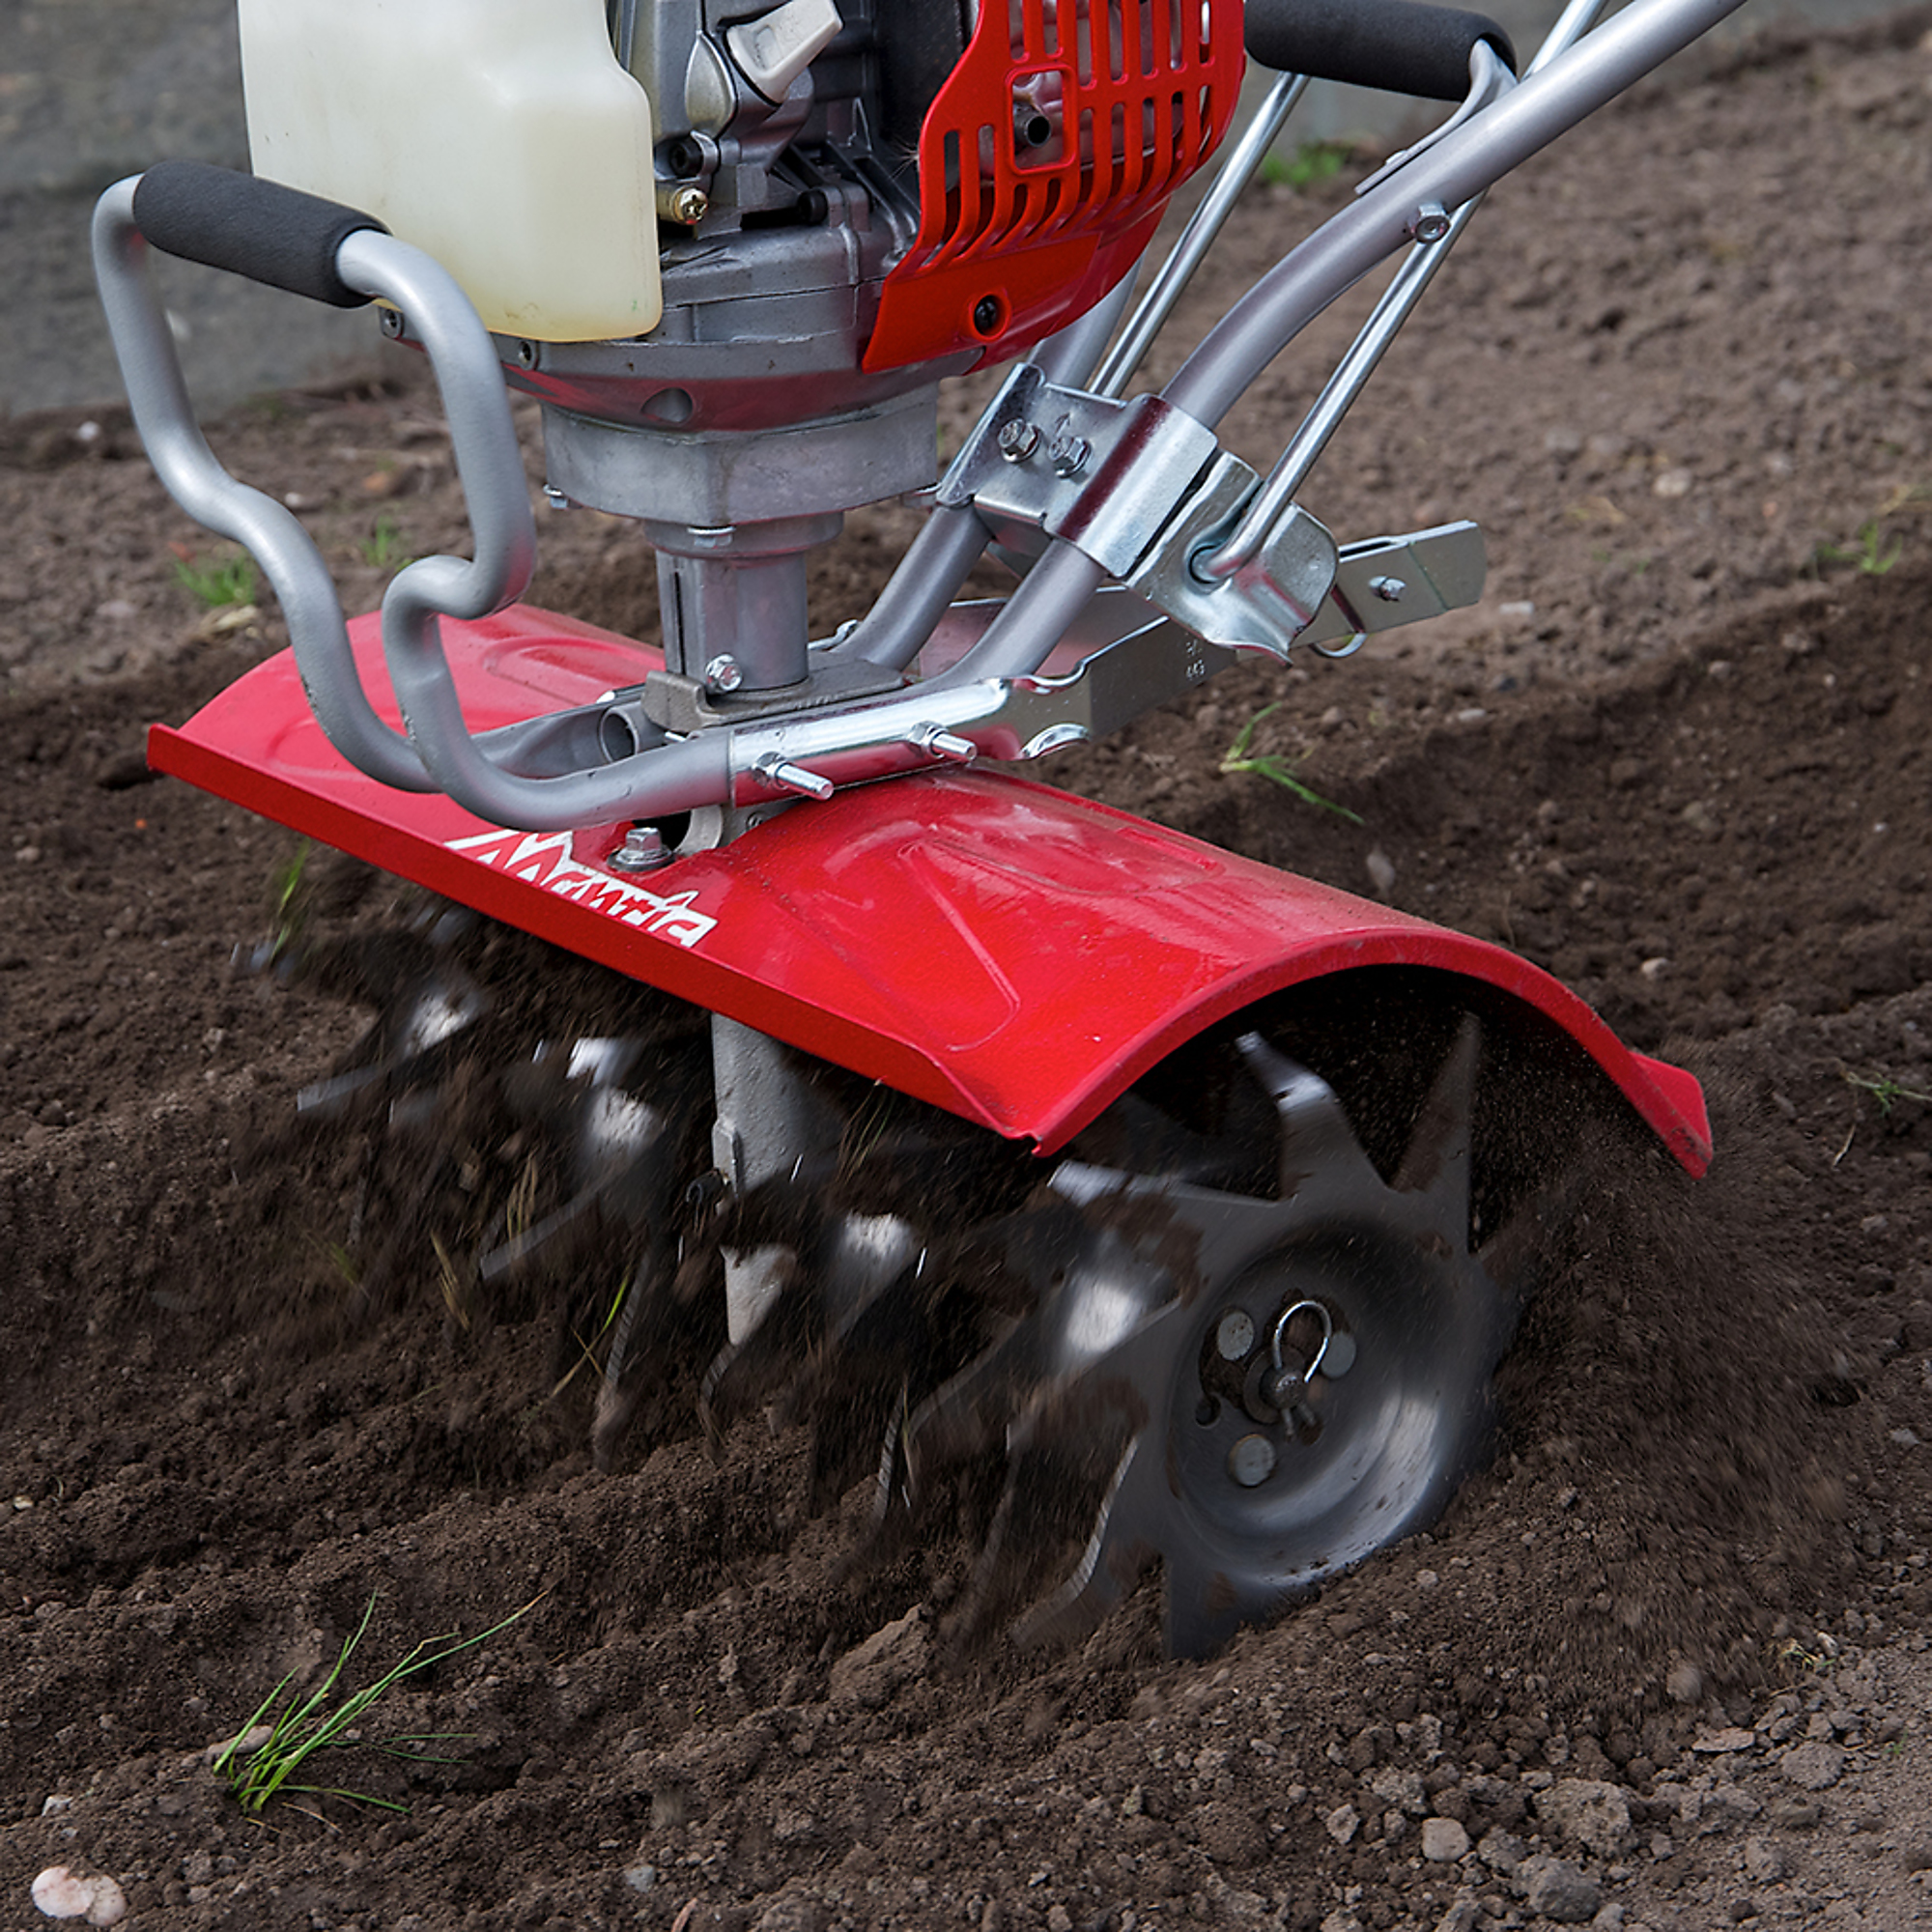 4-Cycle XP Tiller w/Kickstand || Honda GX35 engine, Max. Working Width 16 in, Engine Displacement 35 cc, Model - Mantis 7566A